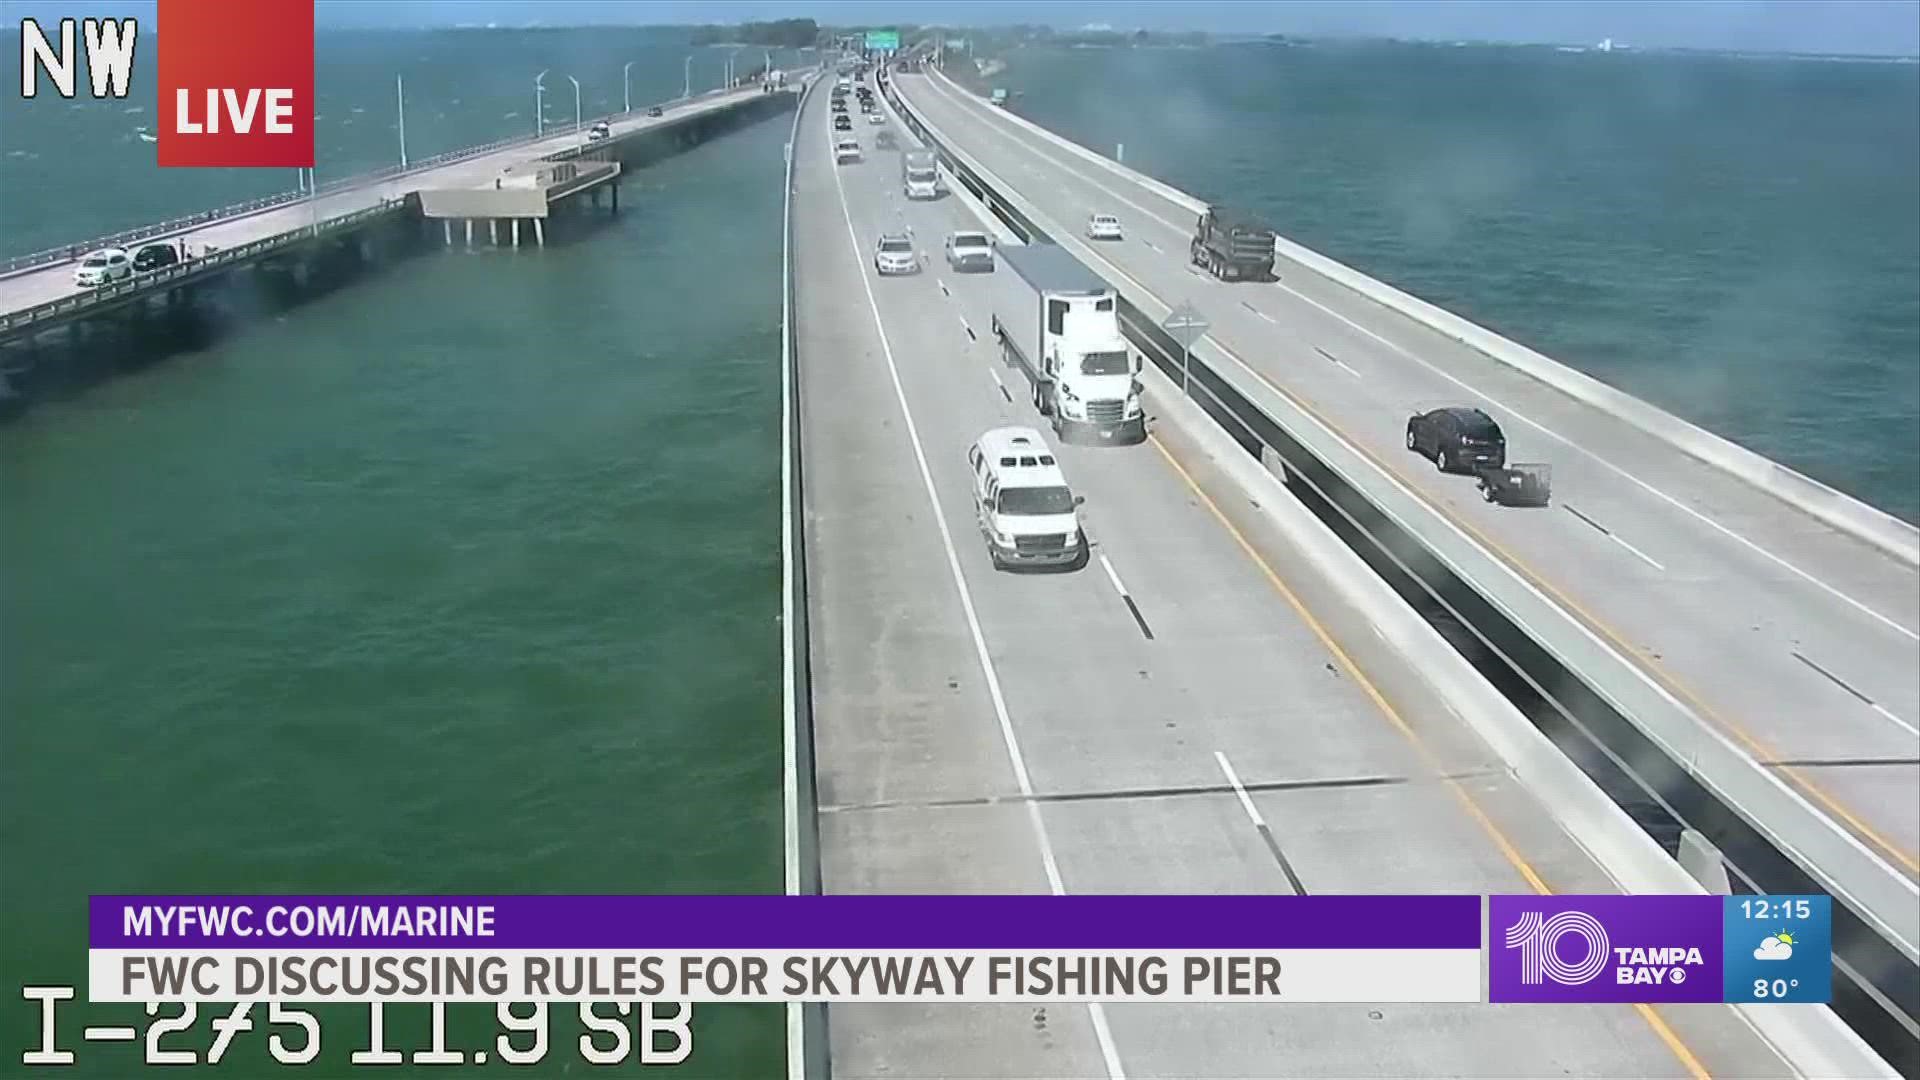 Authorities say hundreds of birds are getting entangled in fishing wires around the pier.